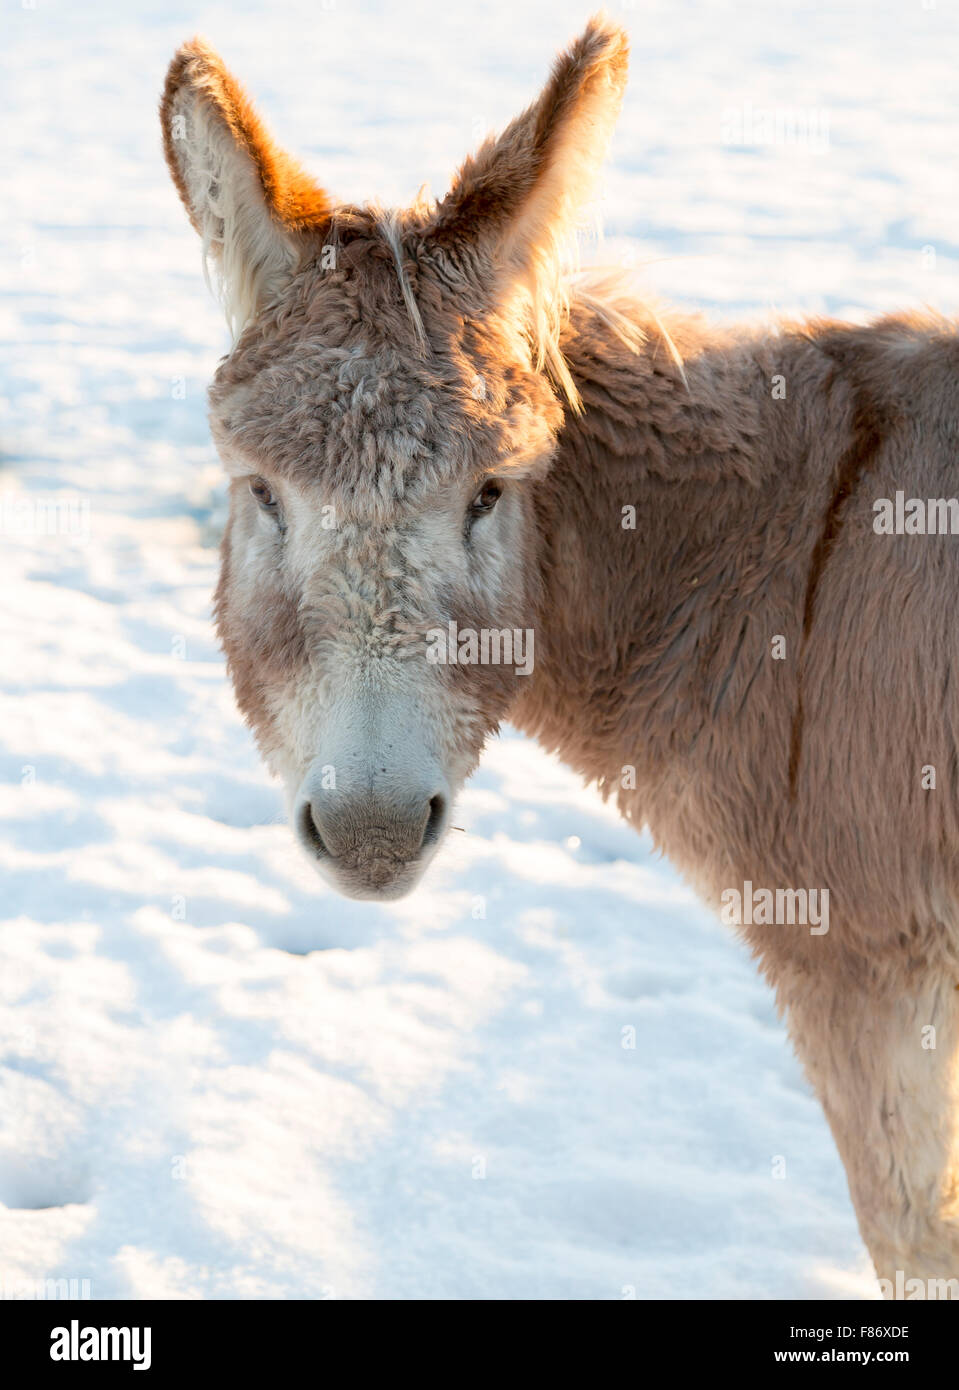 Donkey's Face in Winter Stock Photo